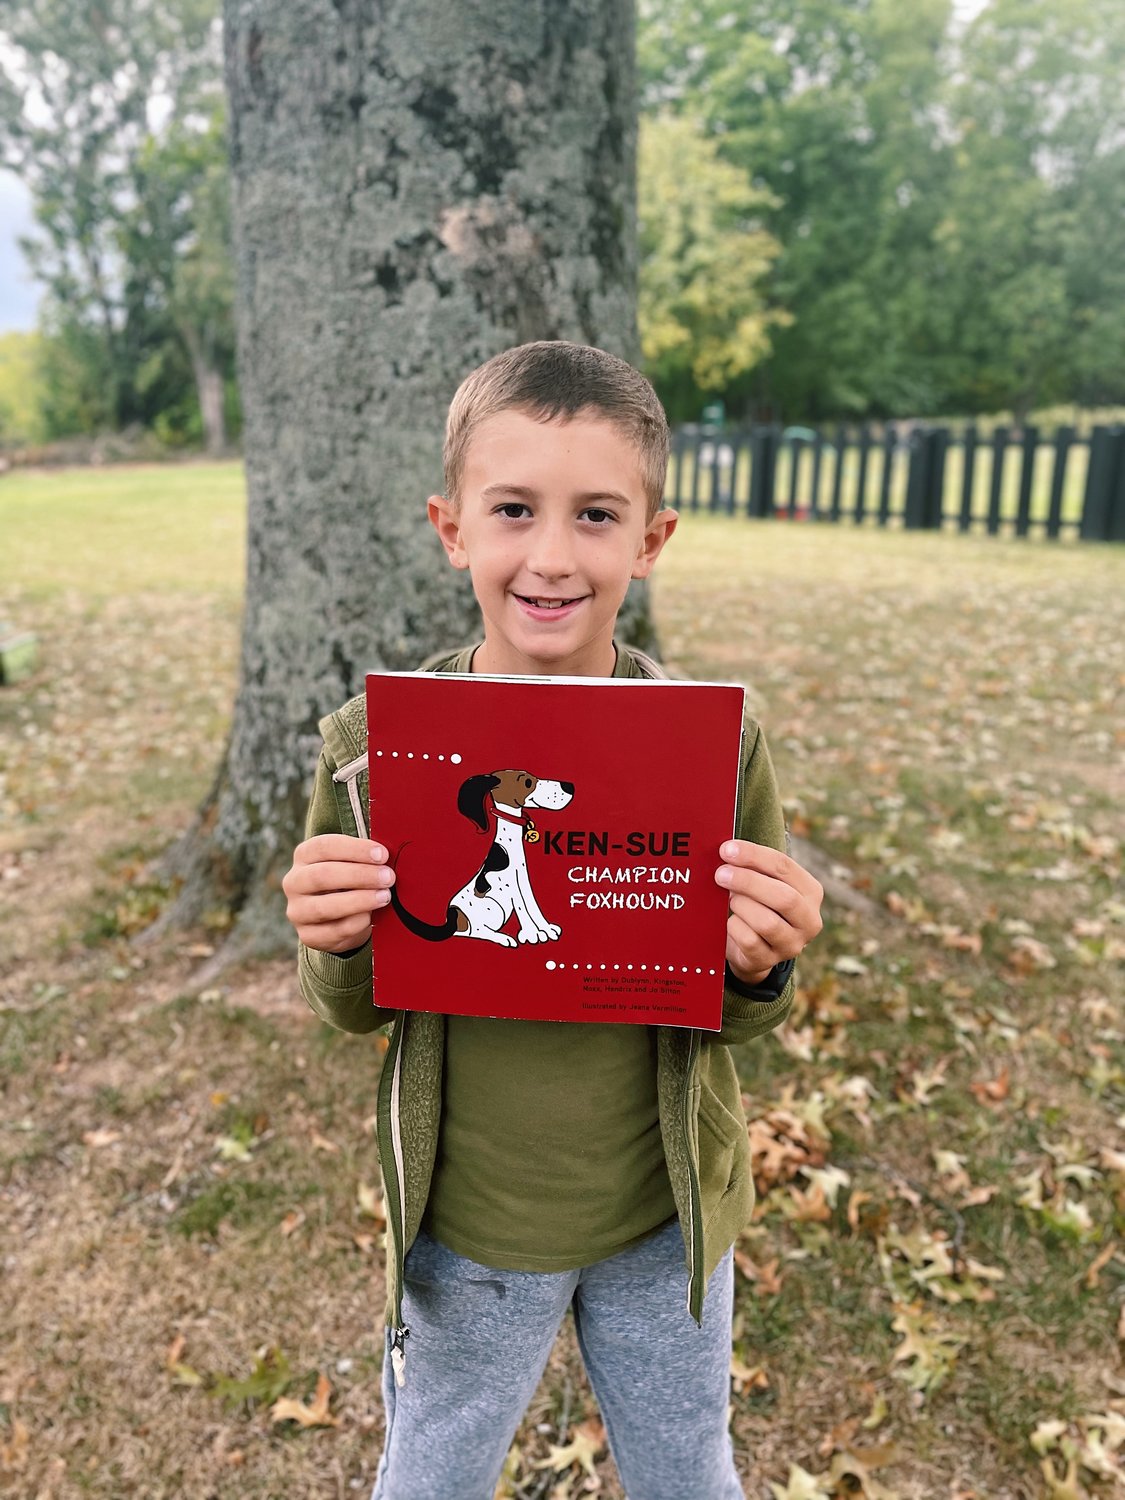 While this is Kingston’s first published book, it may not be his last. “It was really good for him to learn the writing process. He does love to write. He writes stories all the time,” shared his mom Grace Sitton. “